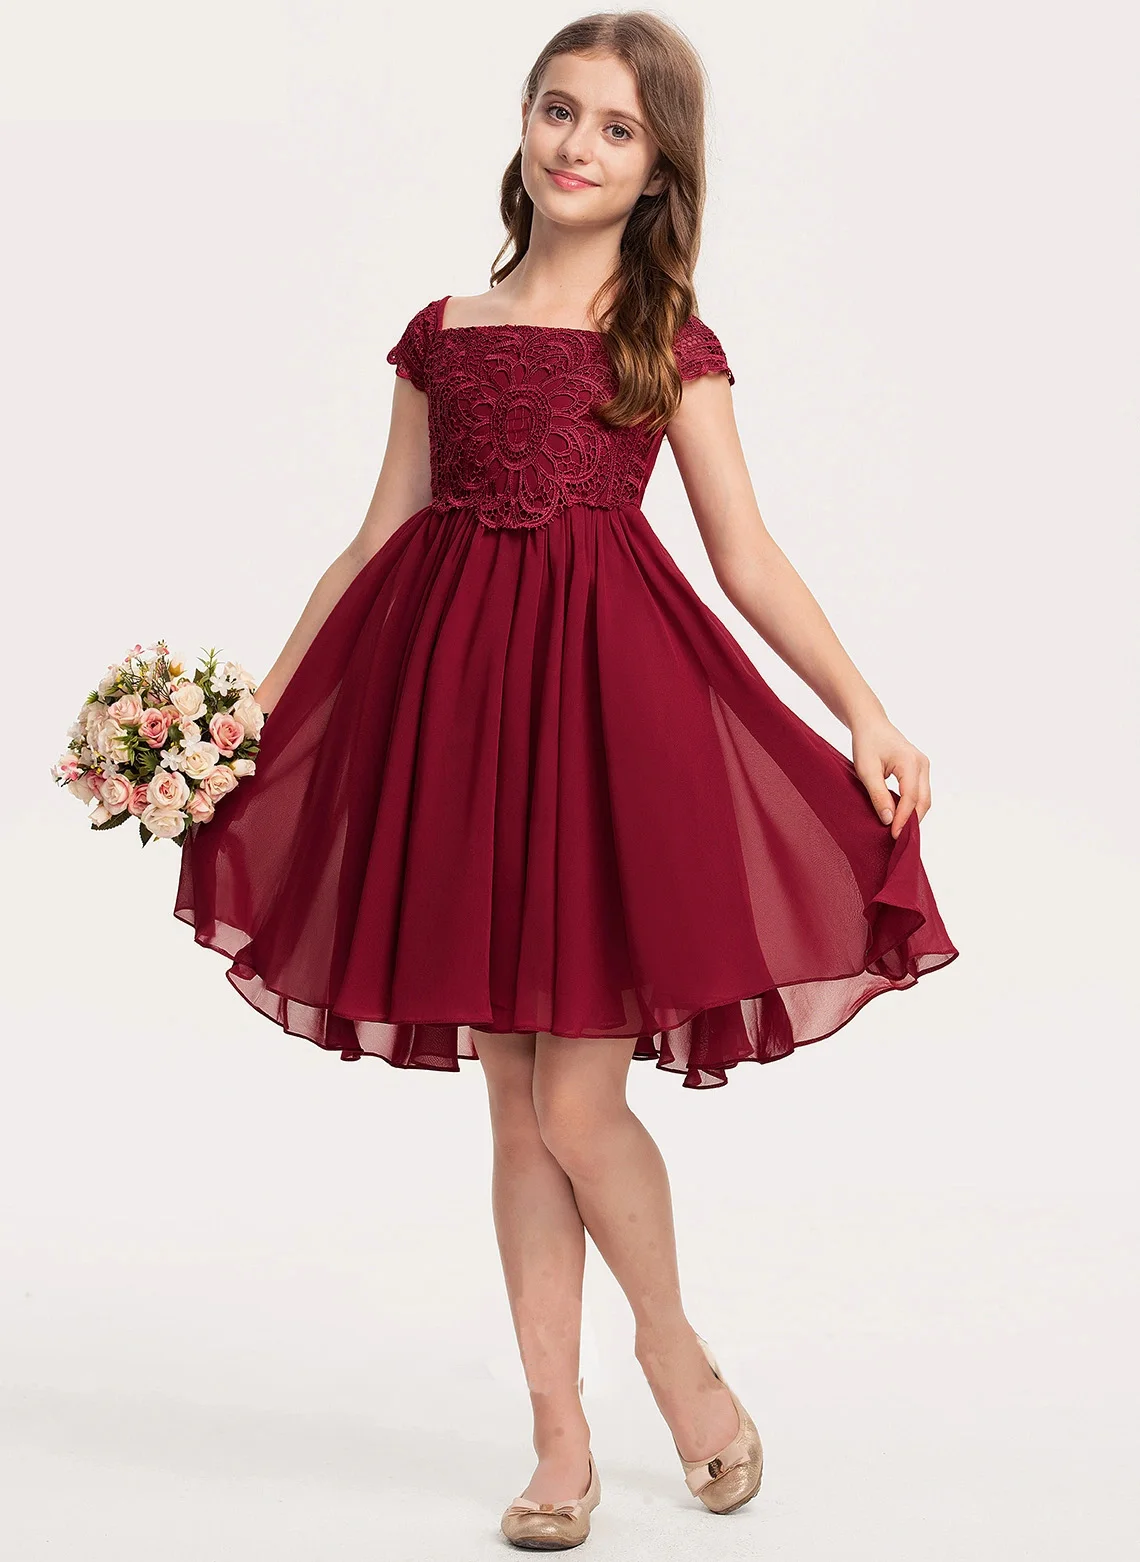 

YZYmanualroom Junior Bridesmaid Dress A Line Off the Shoulder Knee Length Chiffon Lace With Bow Pageant Evening Dresses